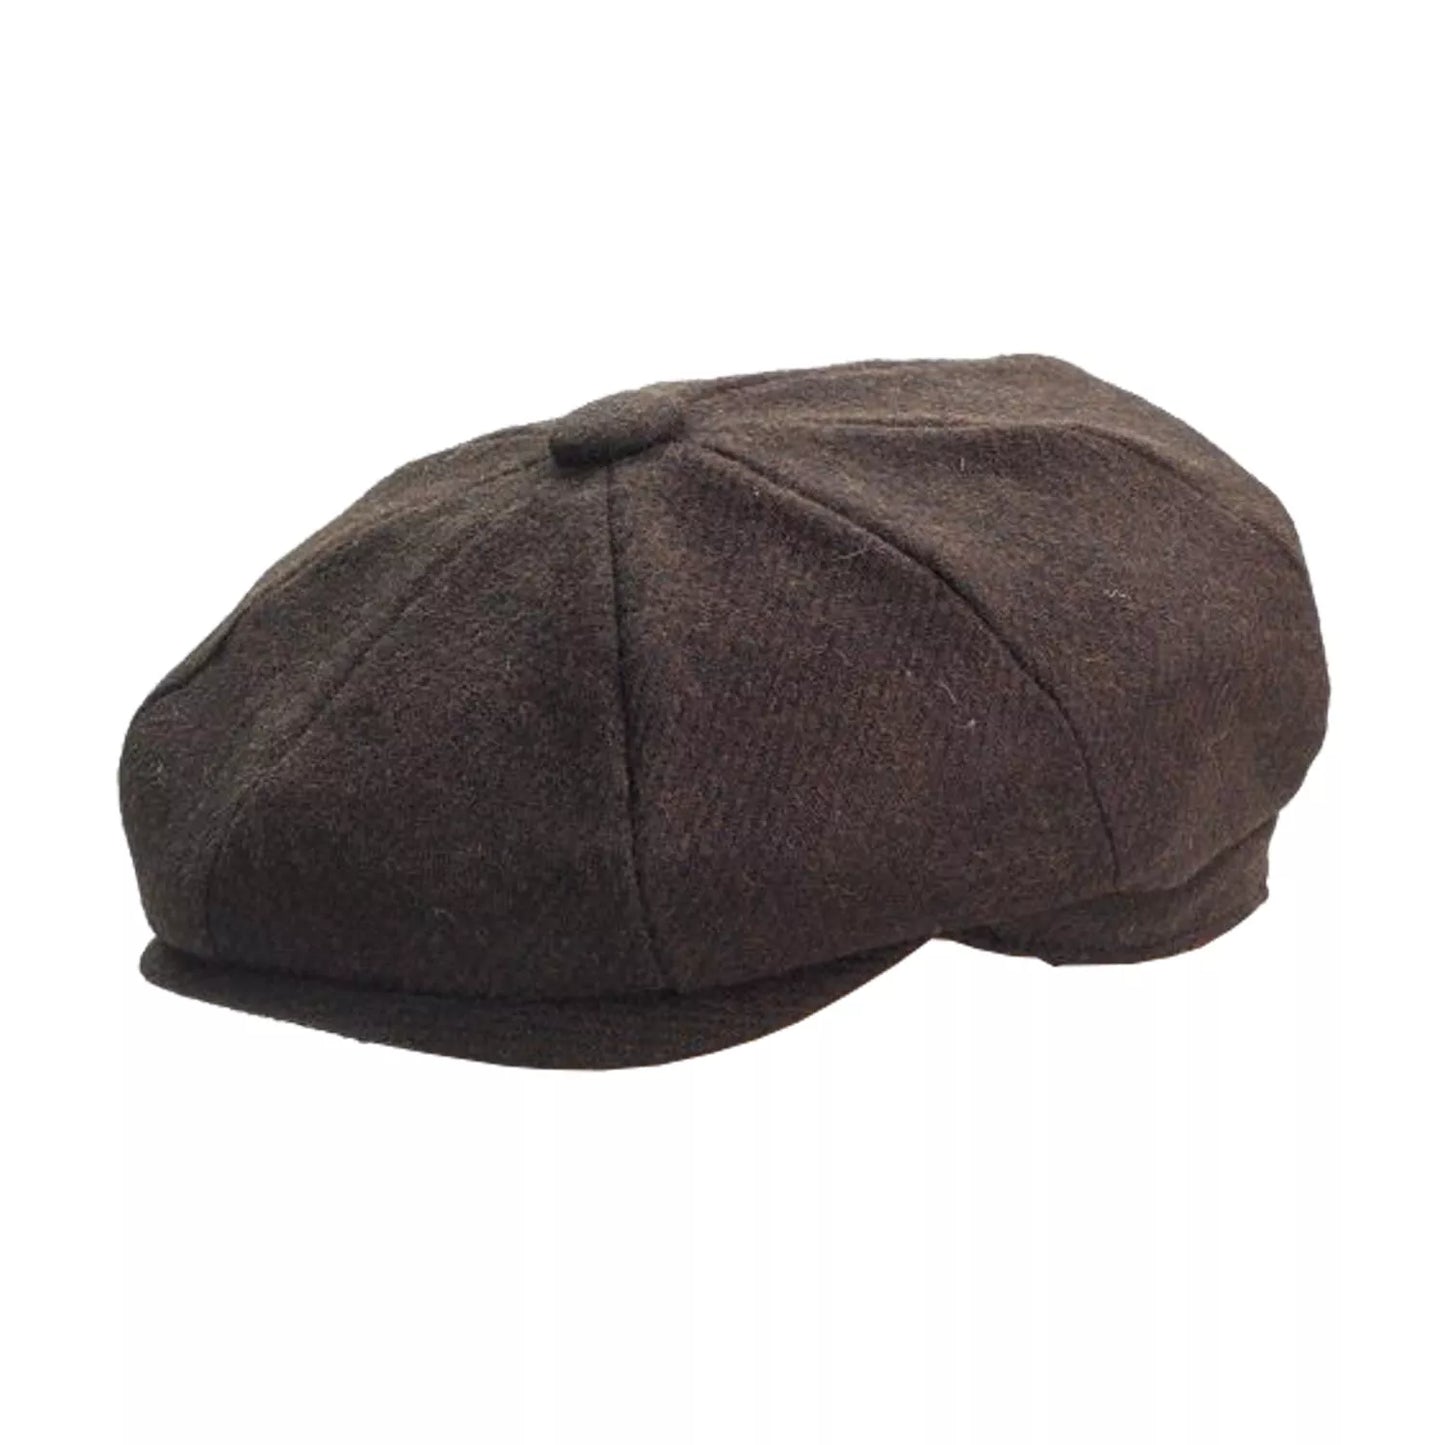 Stand Out With The Hudson 'Brooklyn' Newsboy Cap | Laird Hatters